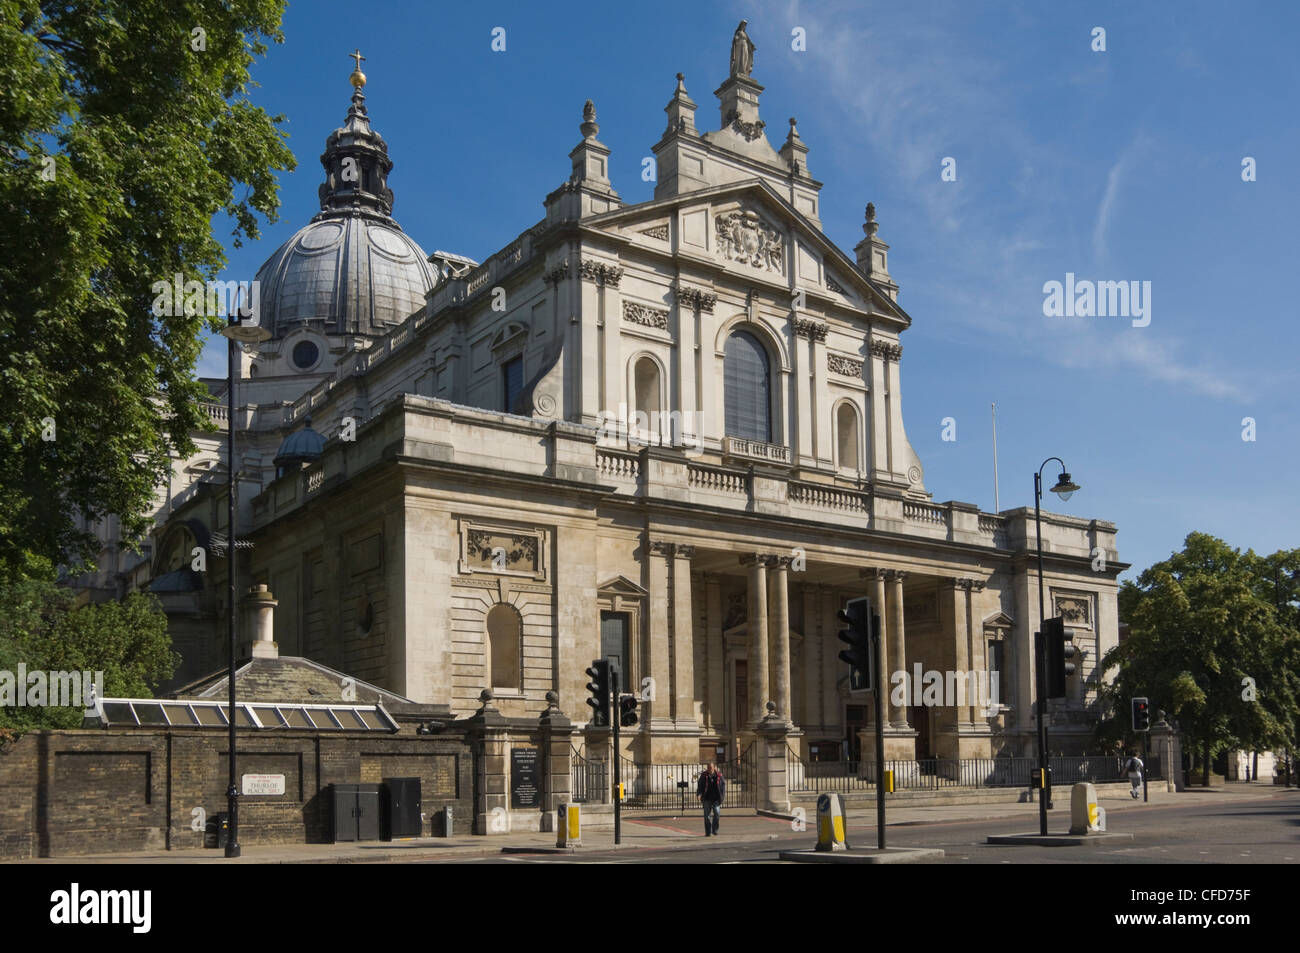 Brompton Oratory, Londres, Angleterre, Royaume-Uni, Europe Banque D'Images